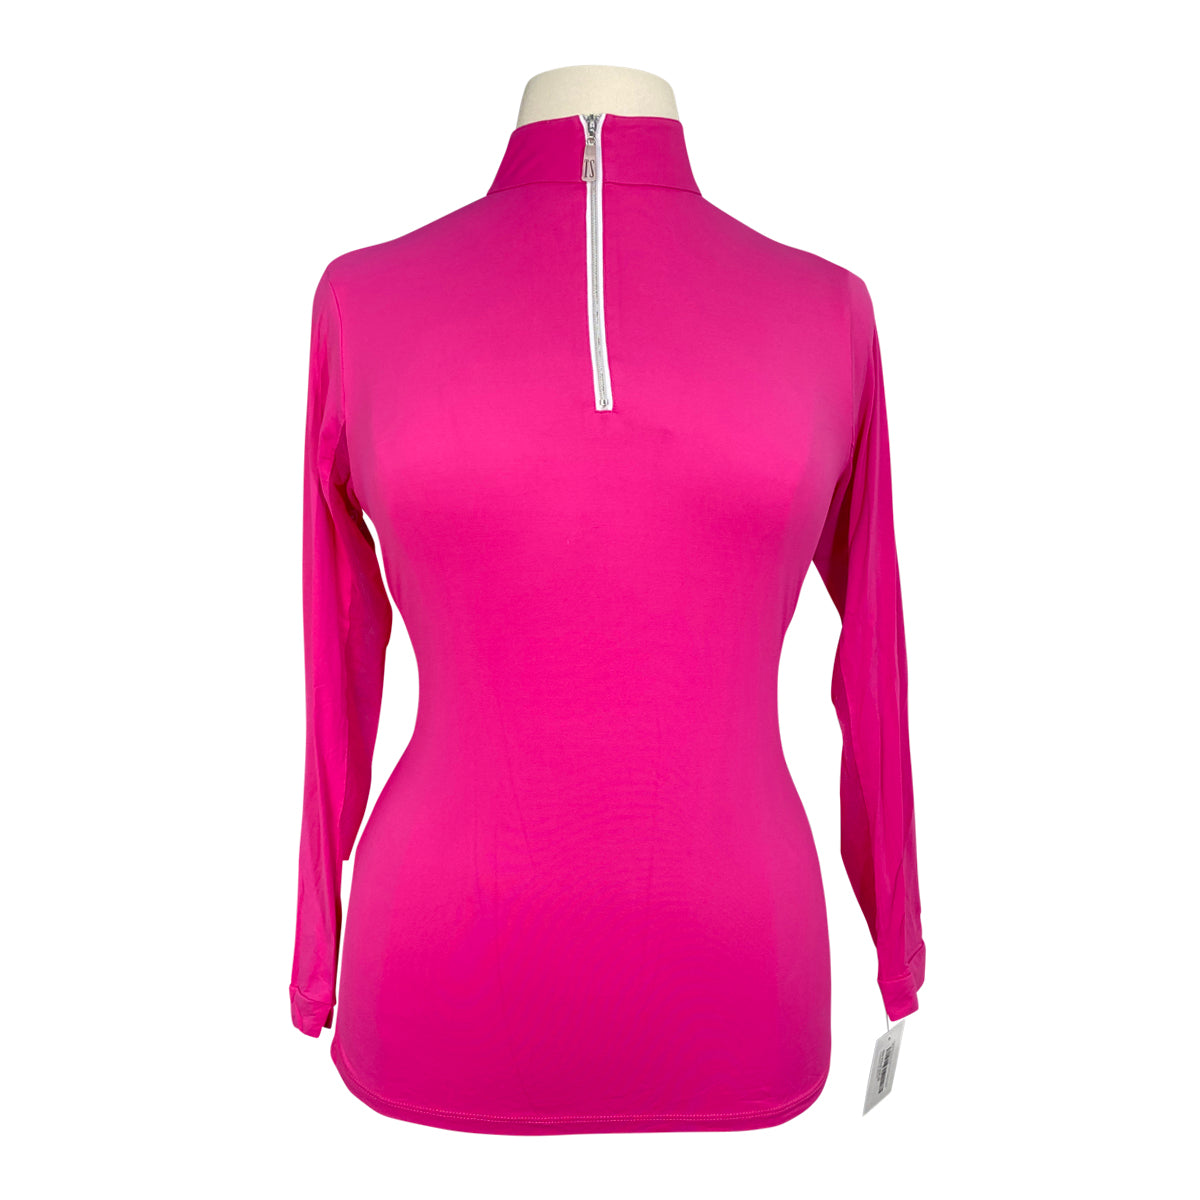 Tailored Sportsman 'Ice Fil' Shirt in Hot Pink